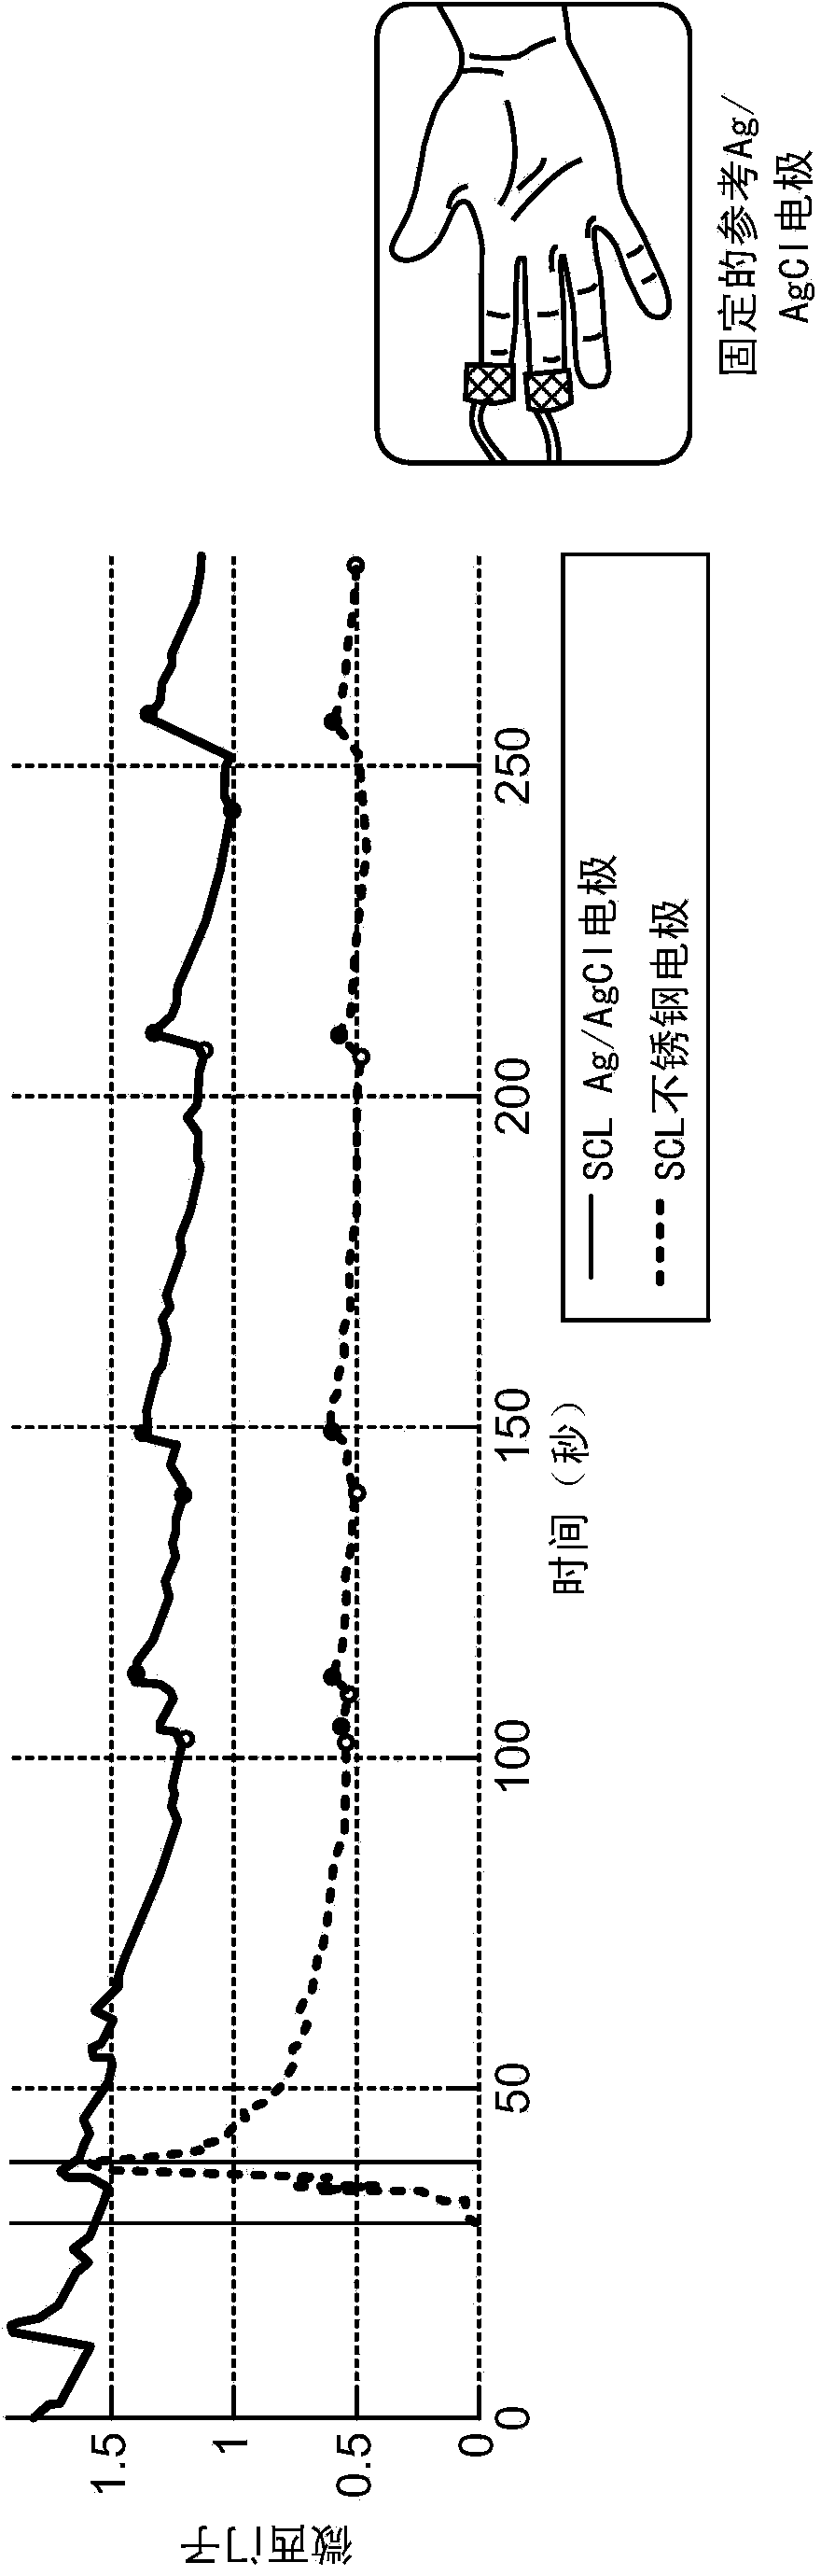 Methods and devices for acquiring electrodermal activity